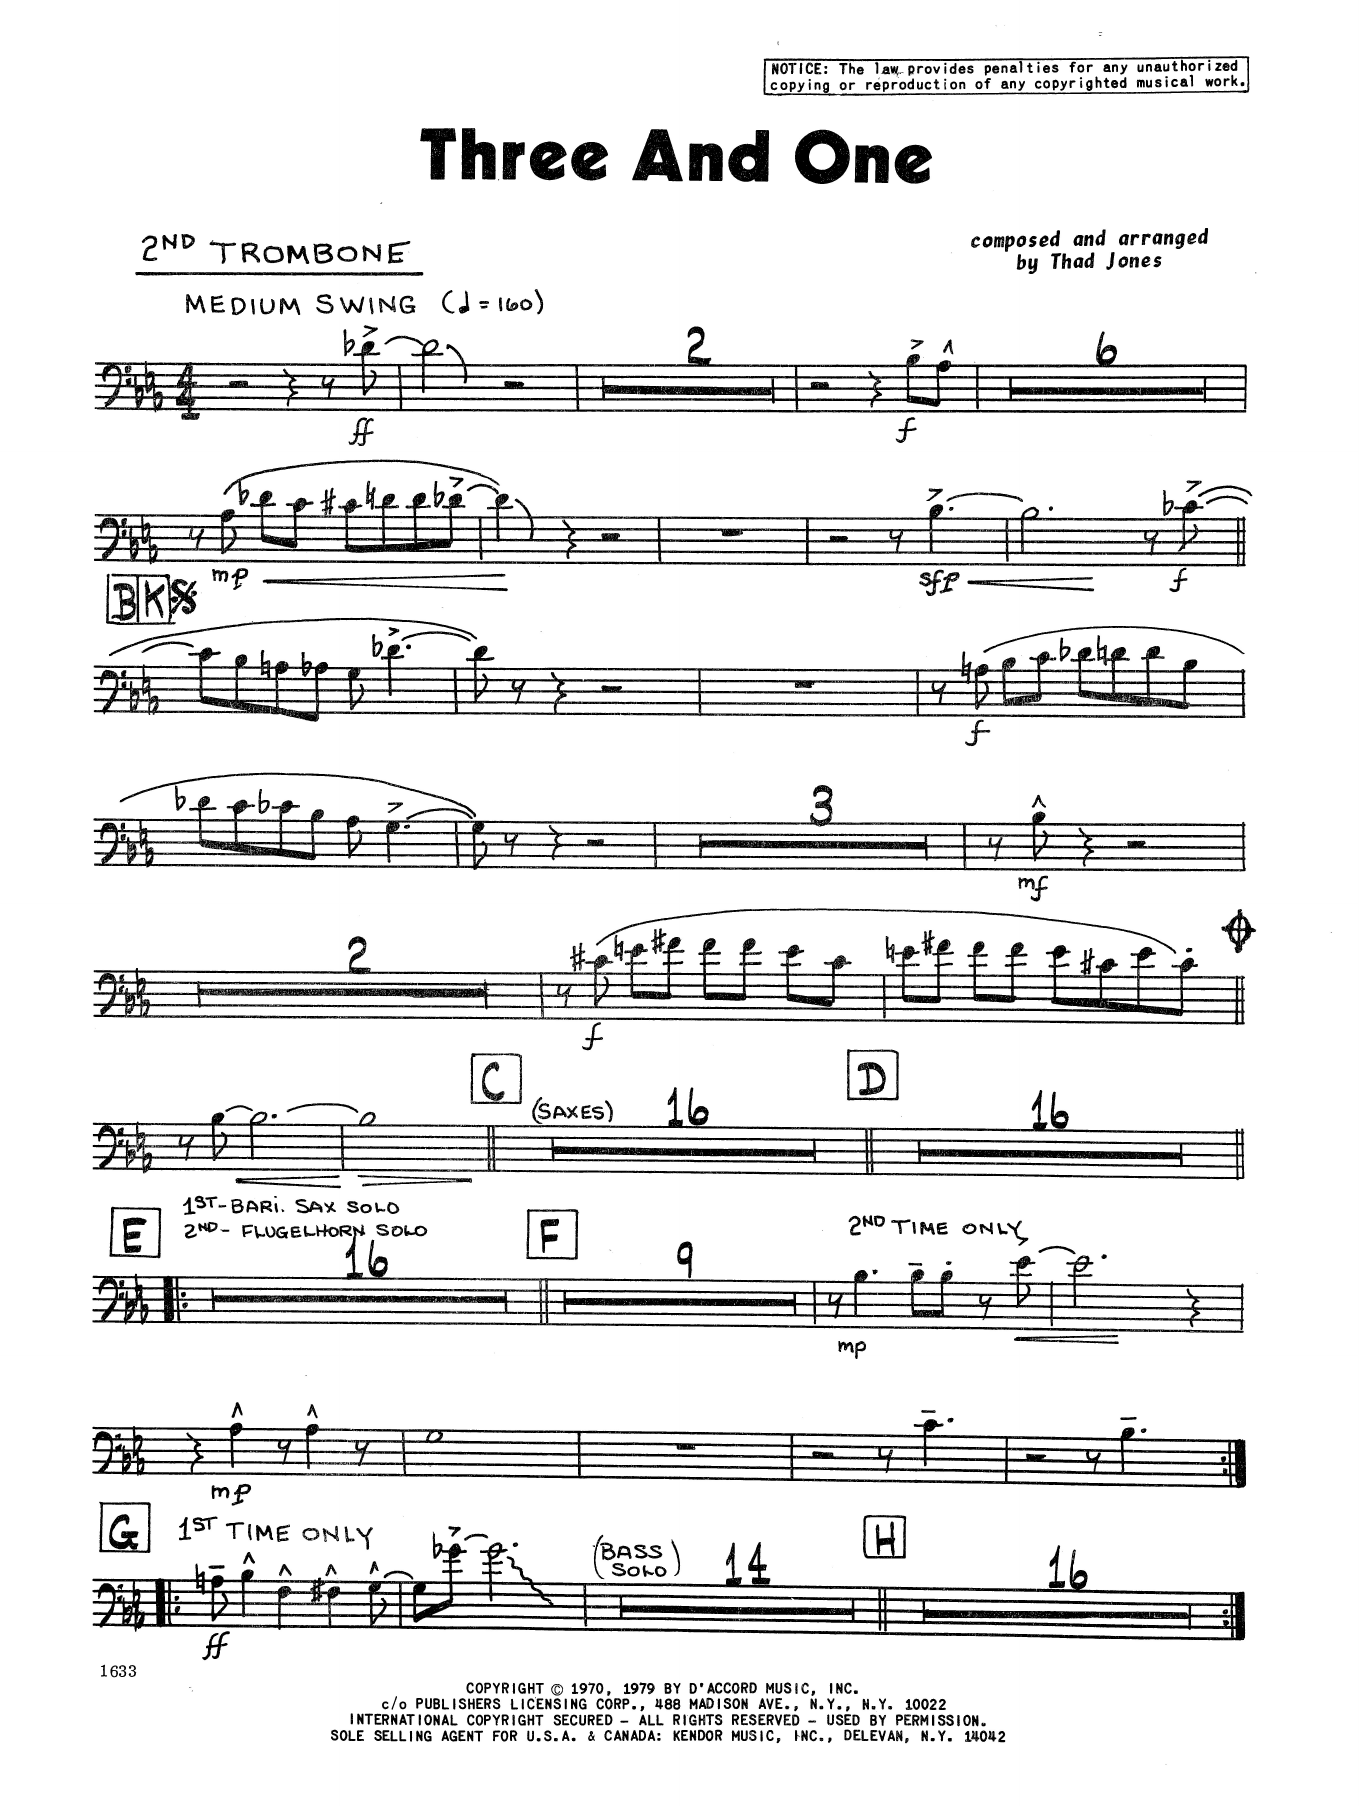 Thad Jones Three And One - 2nd Trombone sheet music preview music notes and score for Jazz Ensemble including 2 page(s)